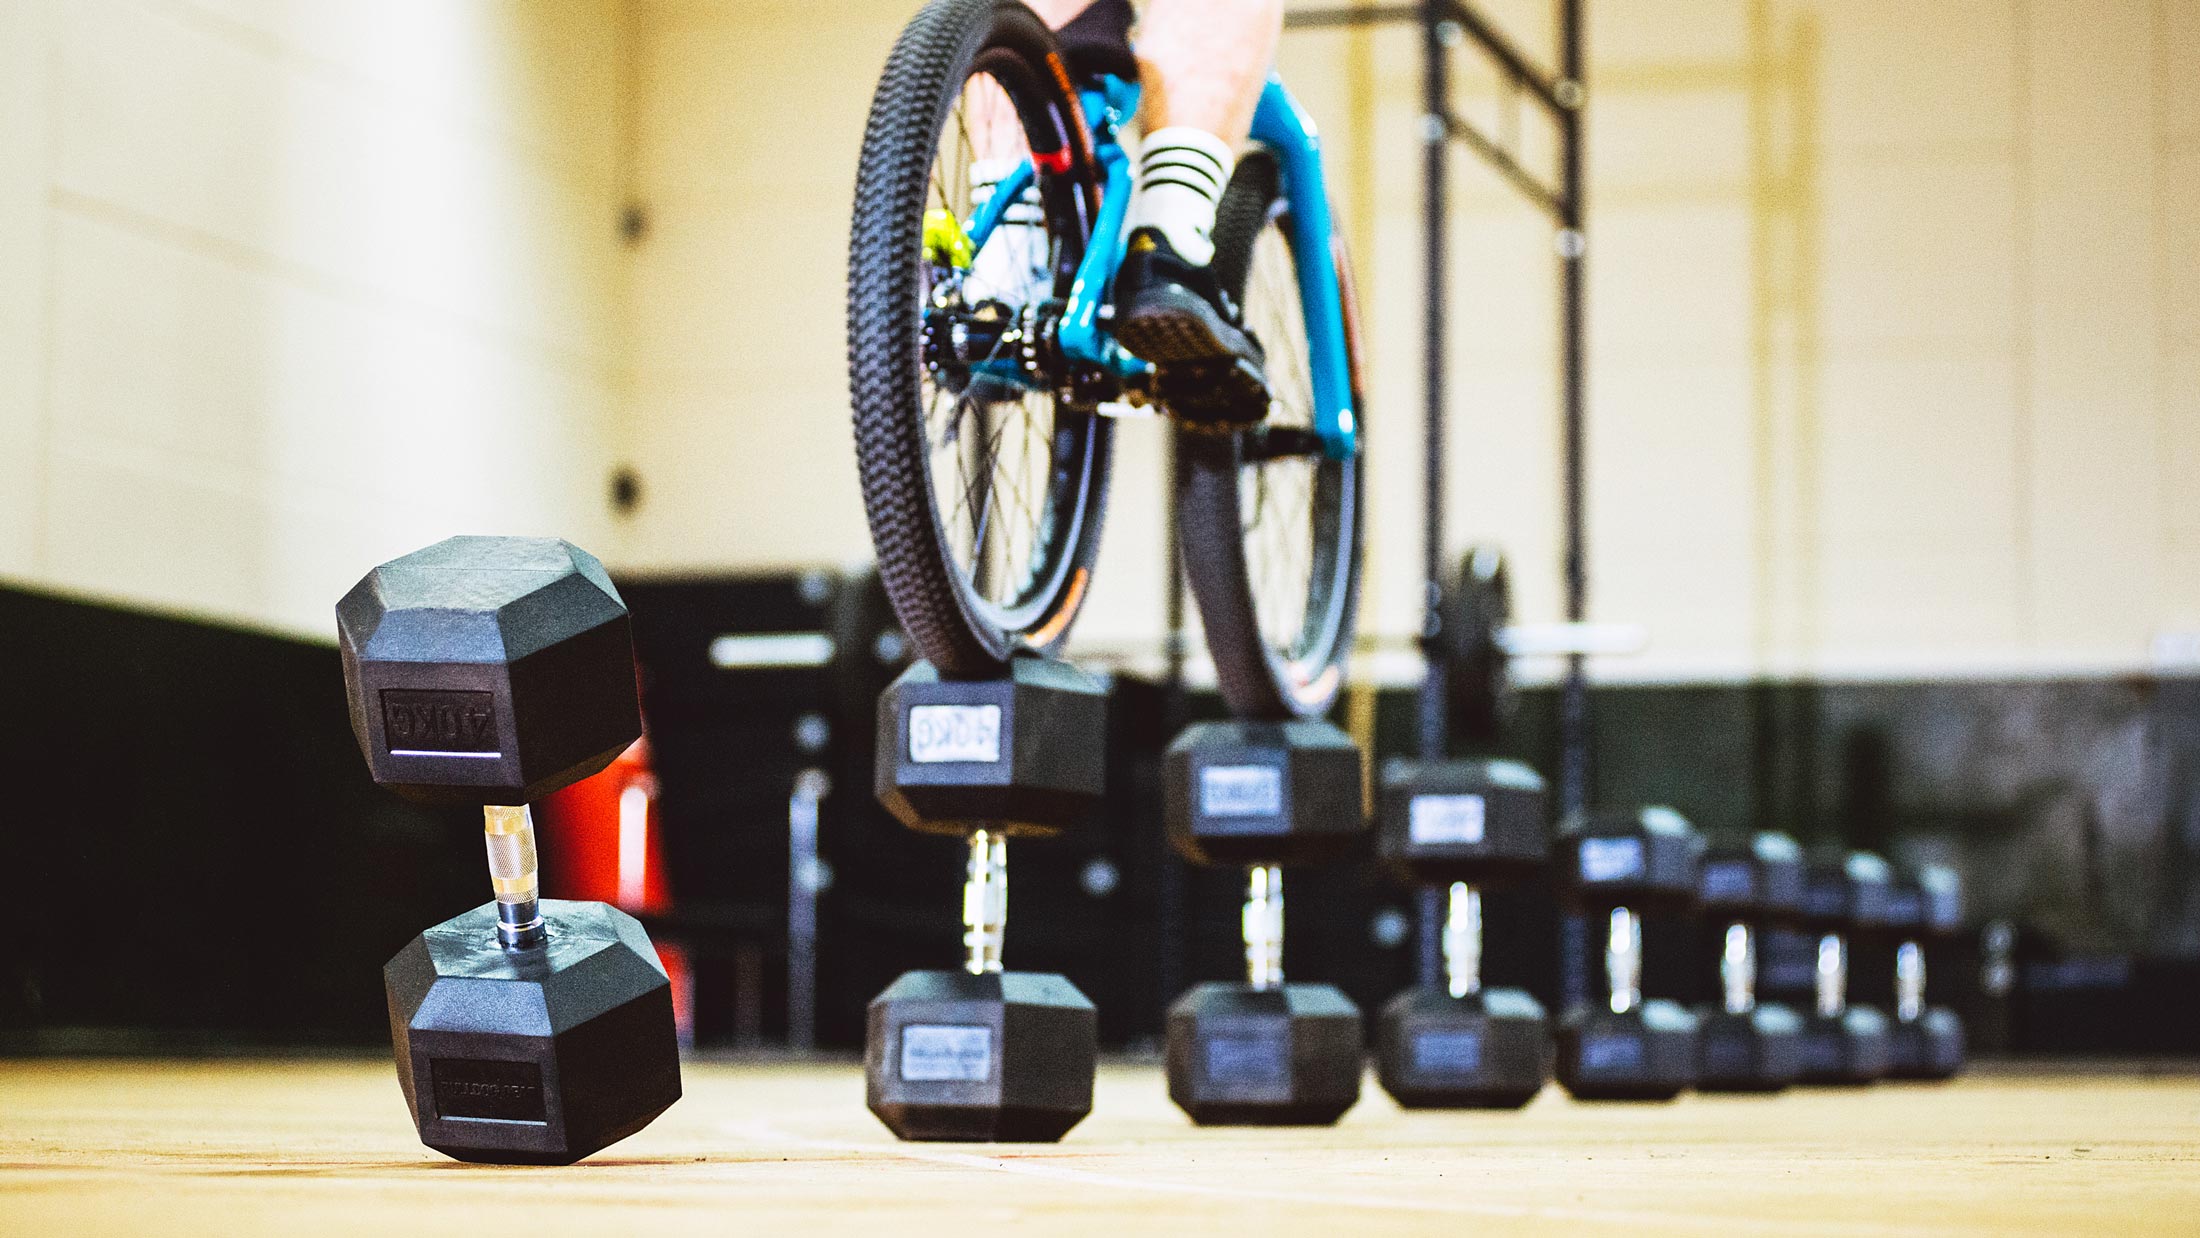 Danny MacAskill goes to the gym